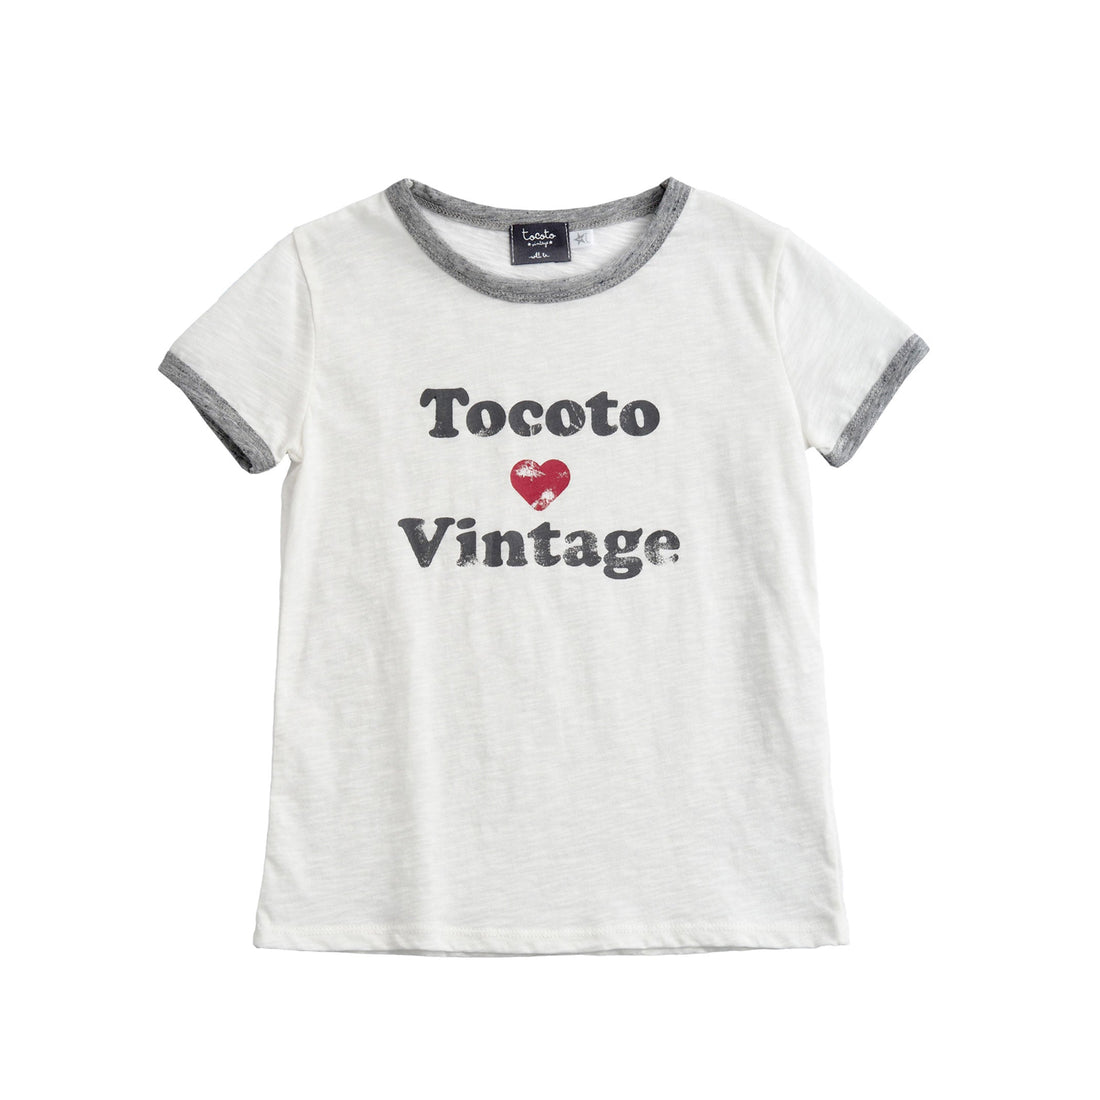 Tocoto Vintage tops and tees Tocoto Vintage White Tocoto Vintage Tee